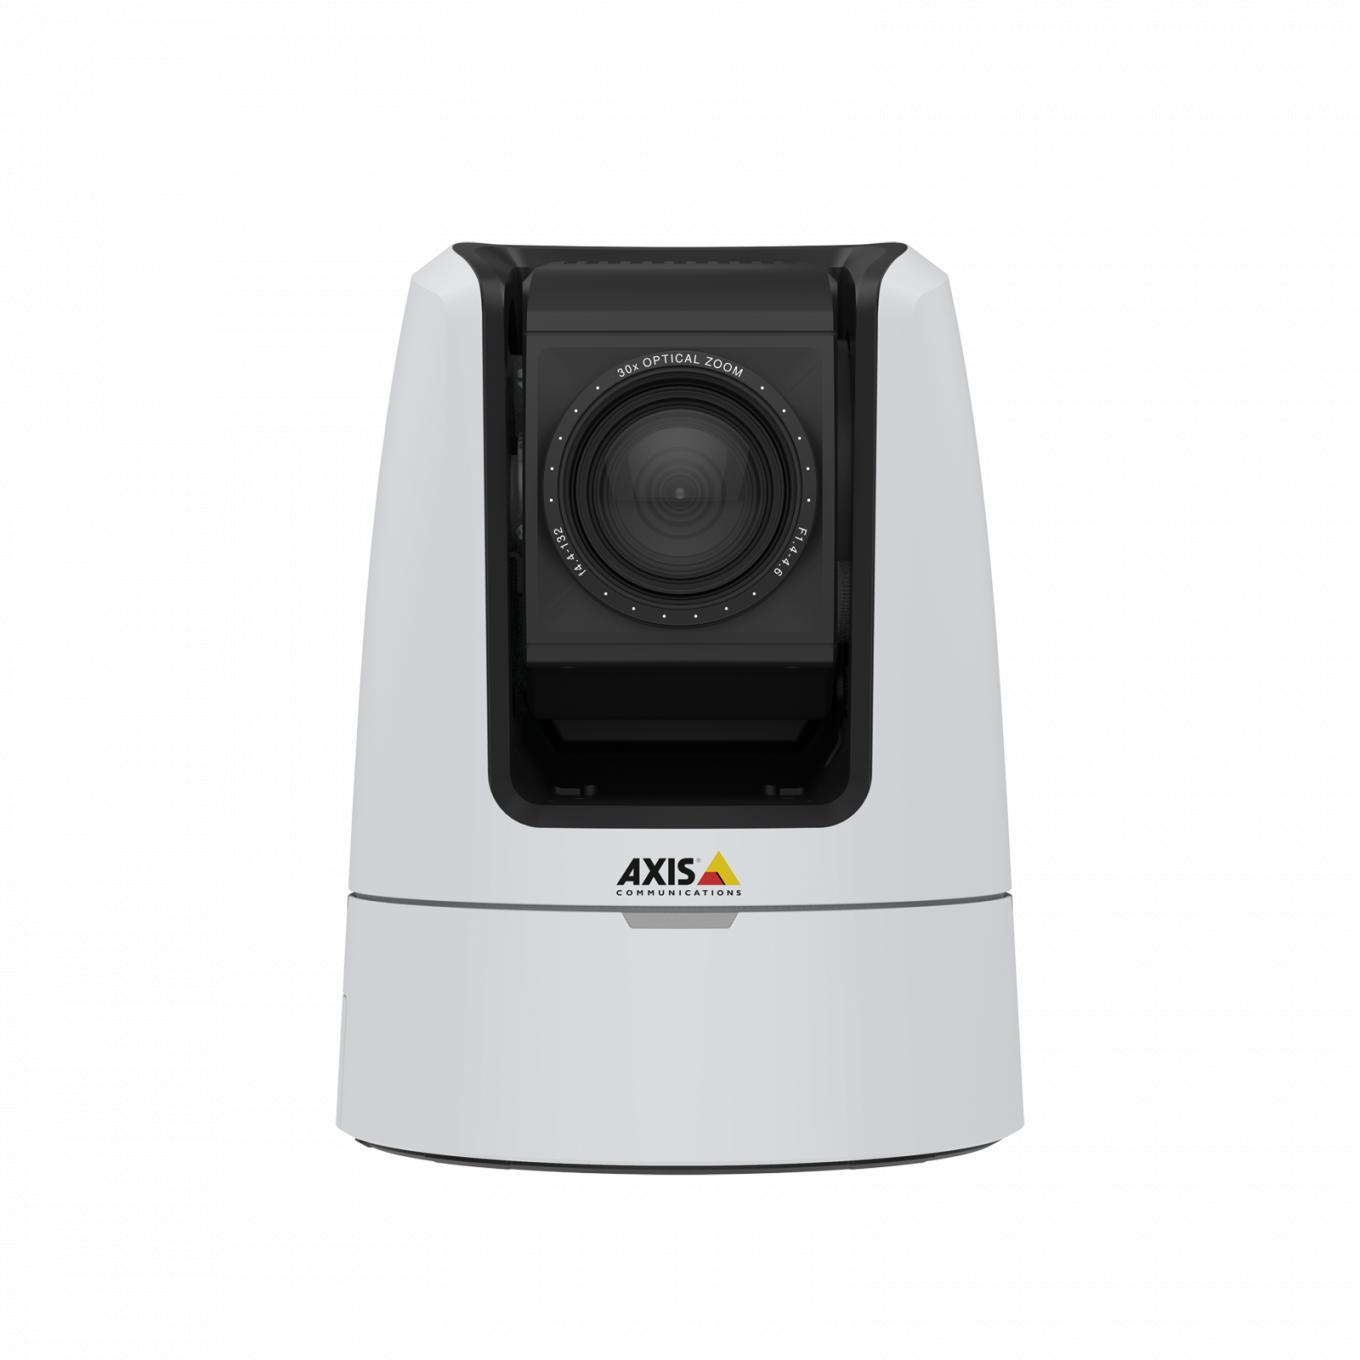 AXIS V5925 PTZ Network Camera offers studio-grade audio with XLR inputs